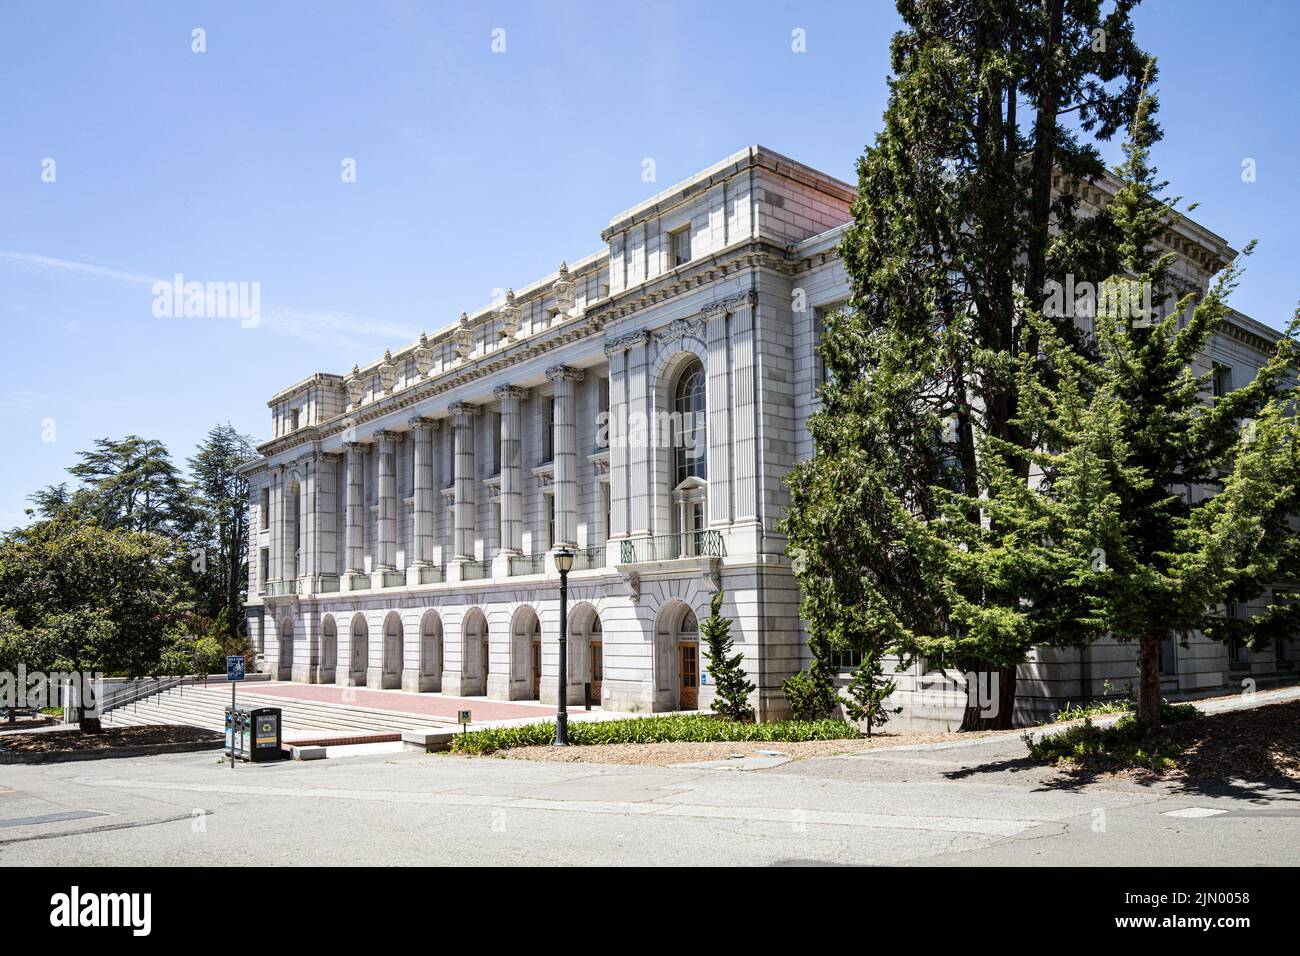 Oakland, USA - May 18, 2022: old   university building in the campus area of Oakland university. Stock Photo